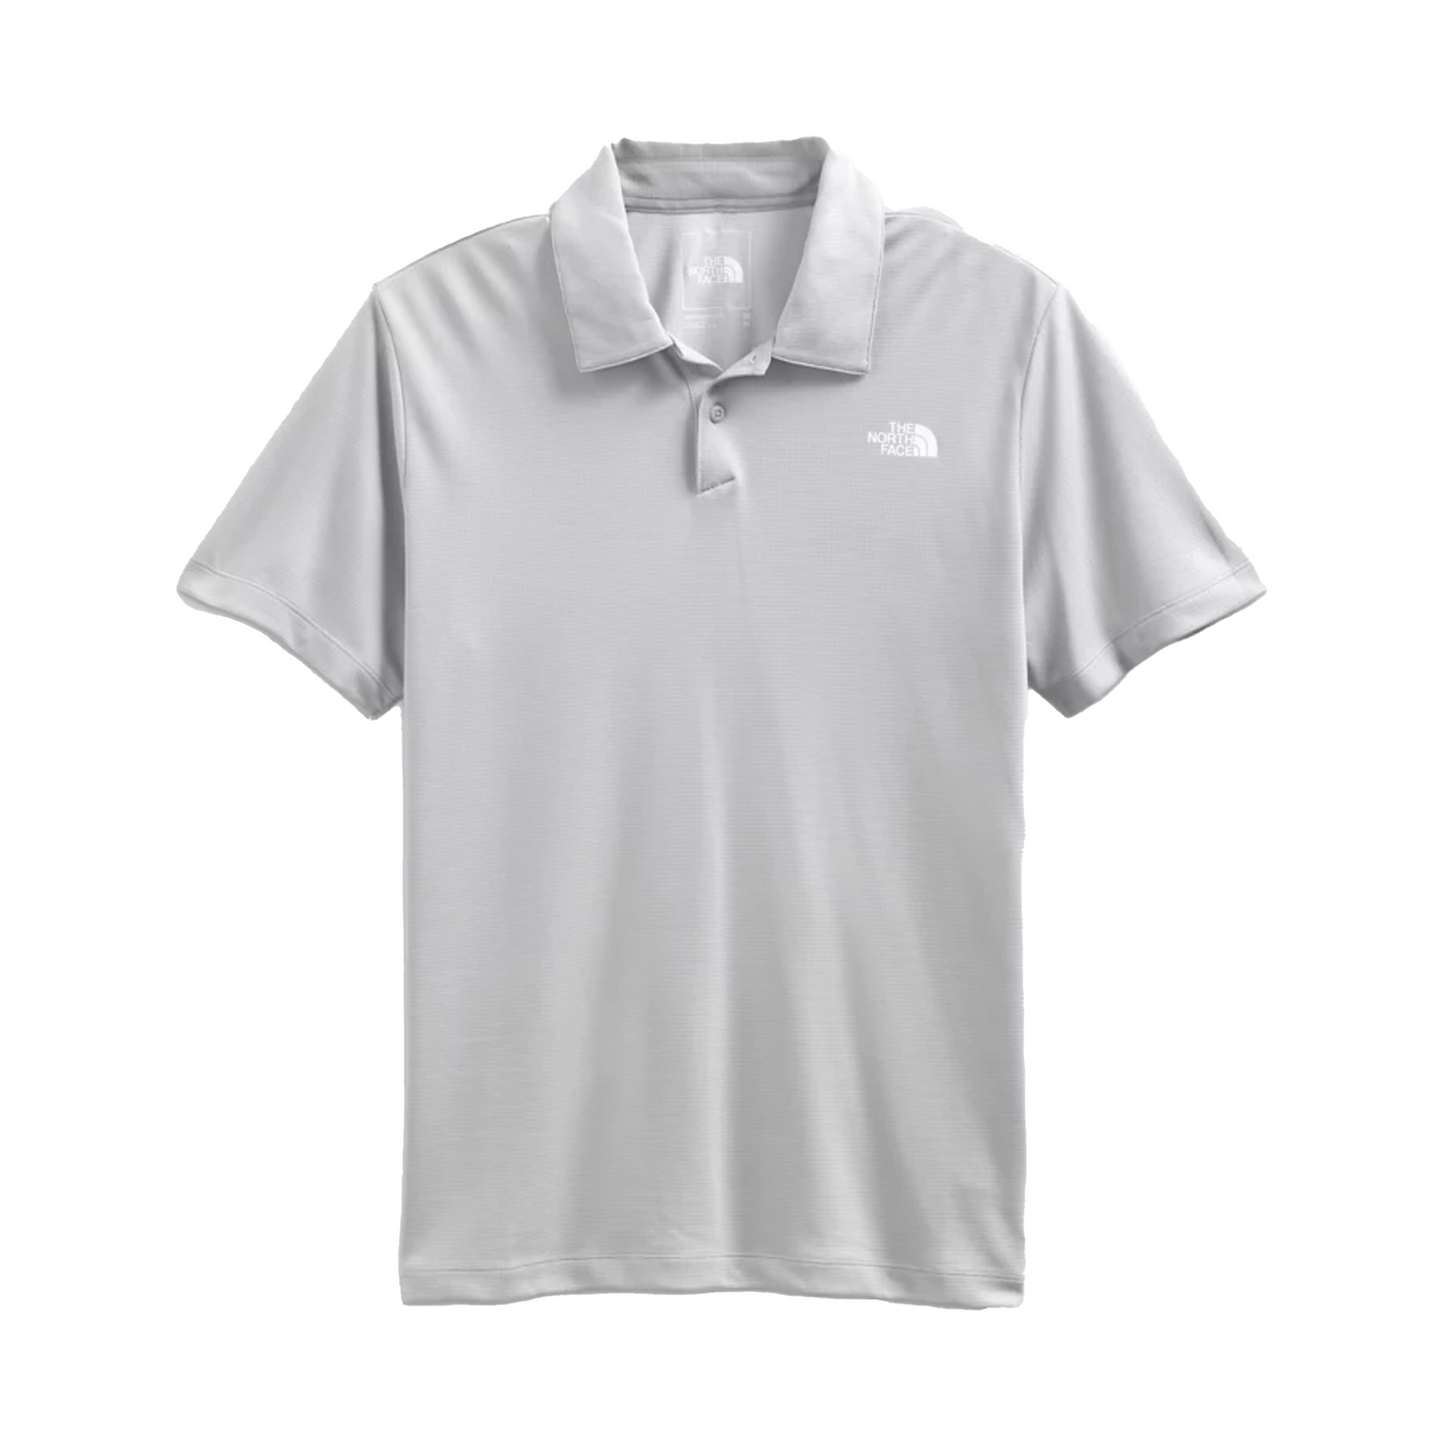 Men's Wander Polo Big Adventure Outfitters